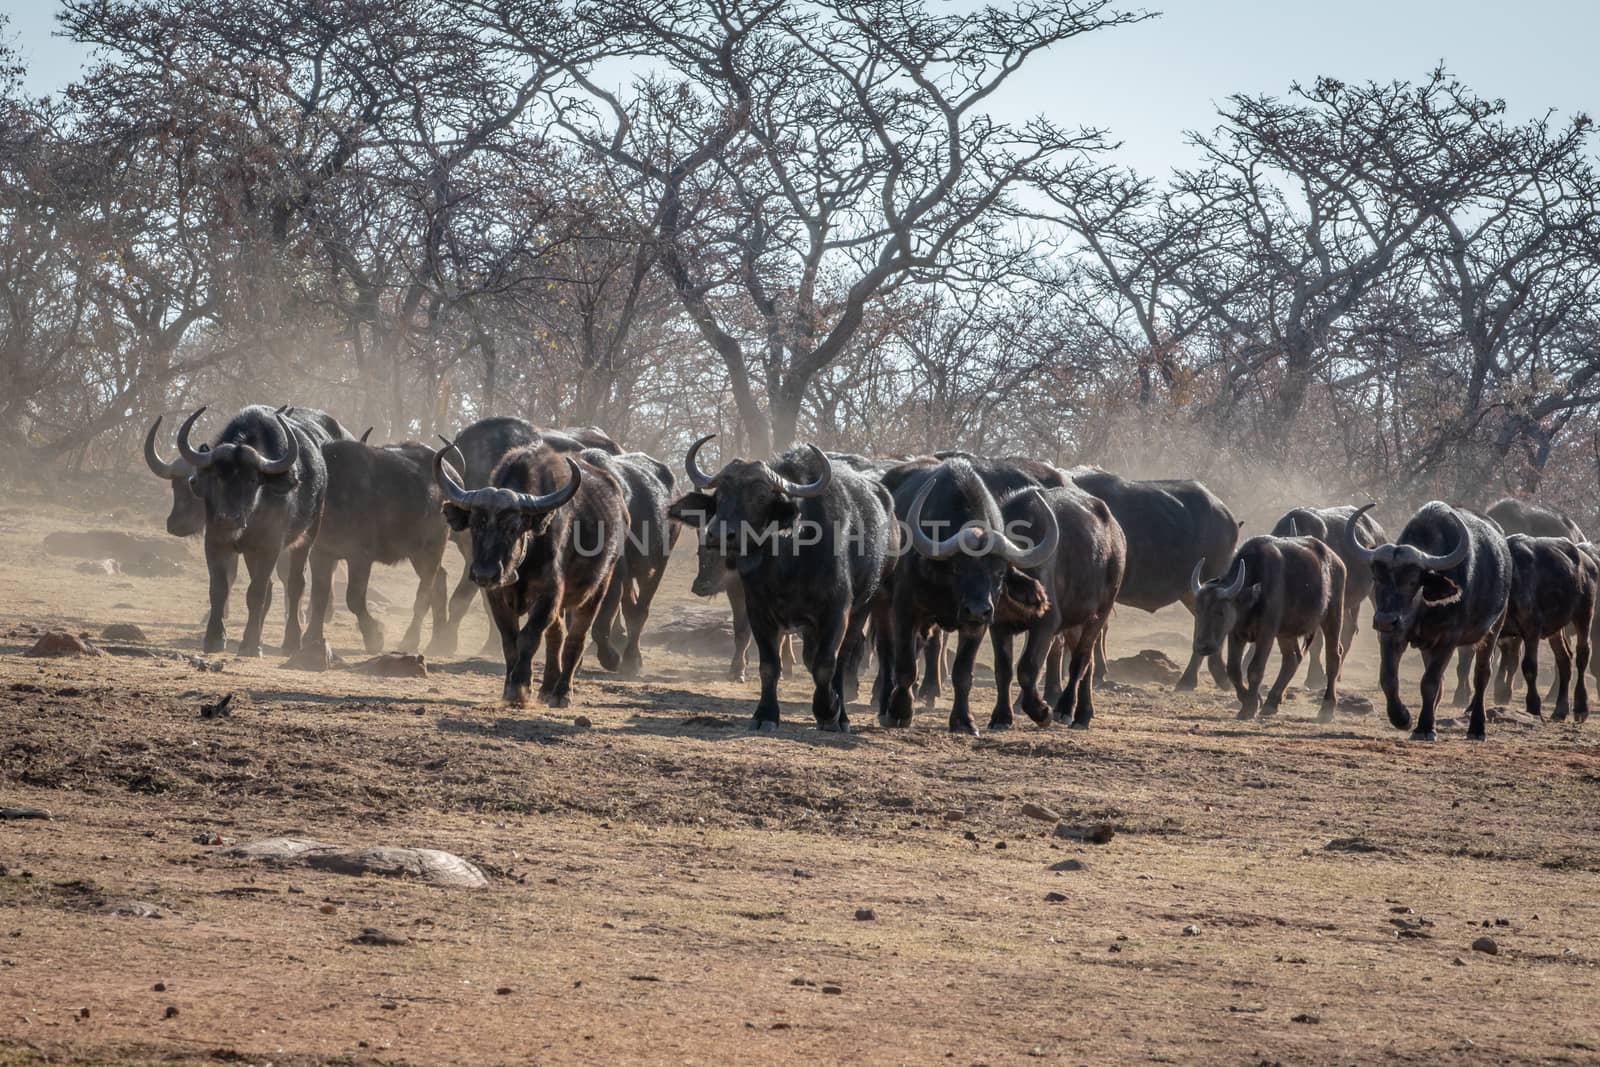 Big herd of African buffalos on an open plain in the Welgevonden game reserve, South Africa.